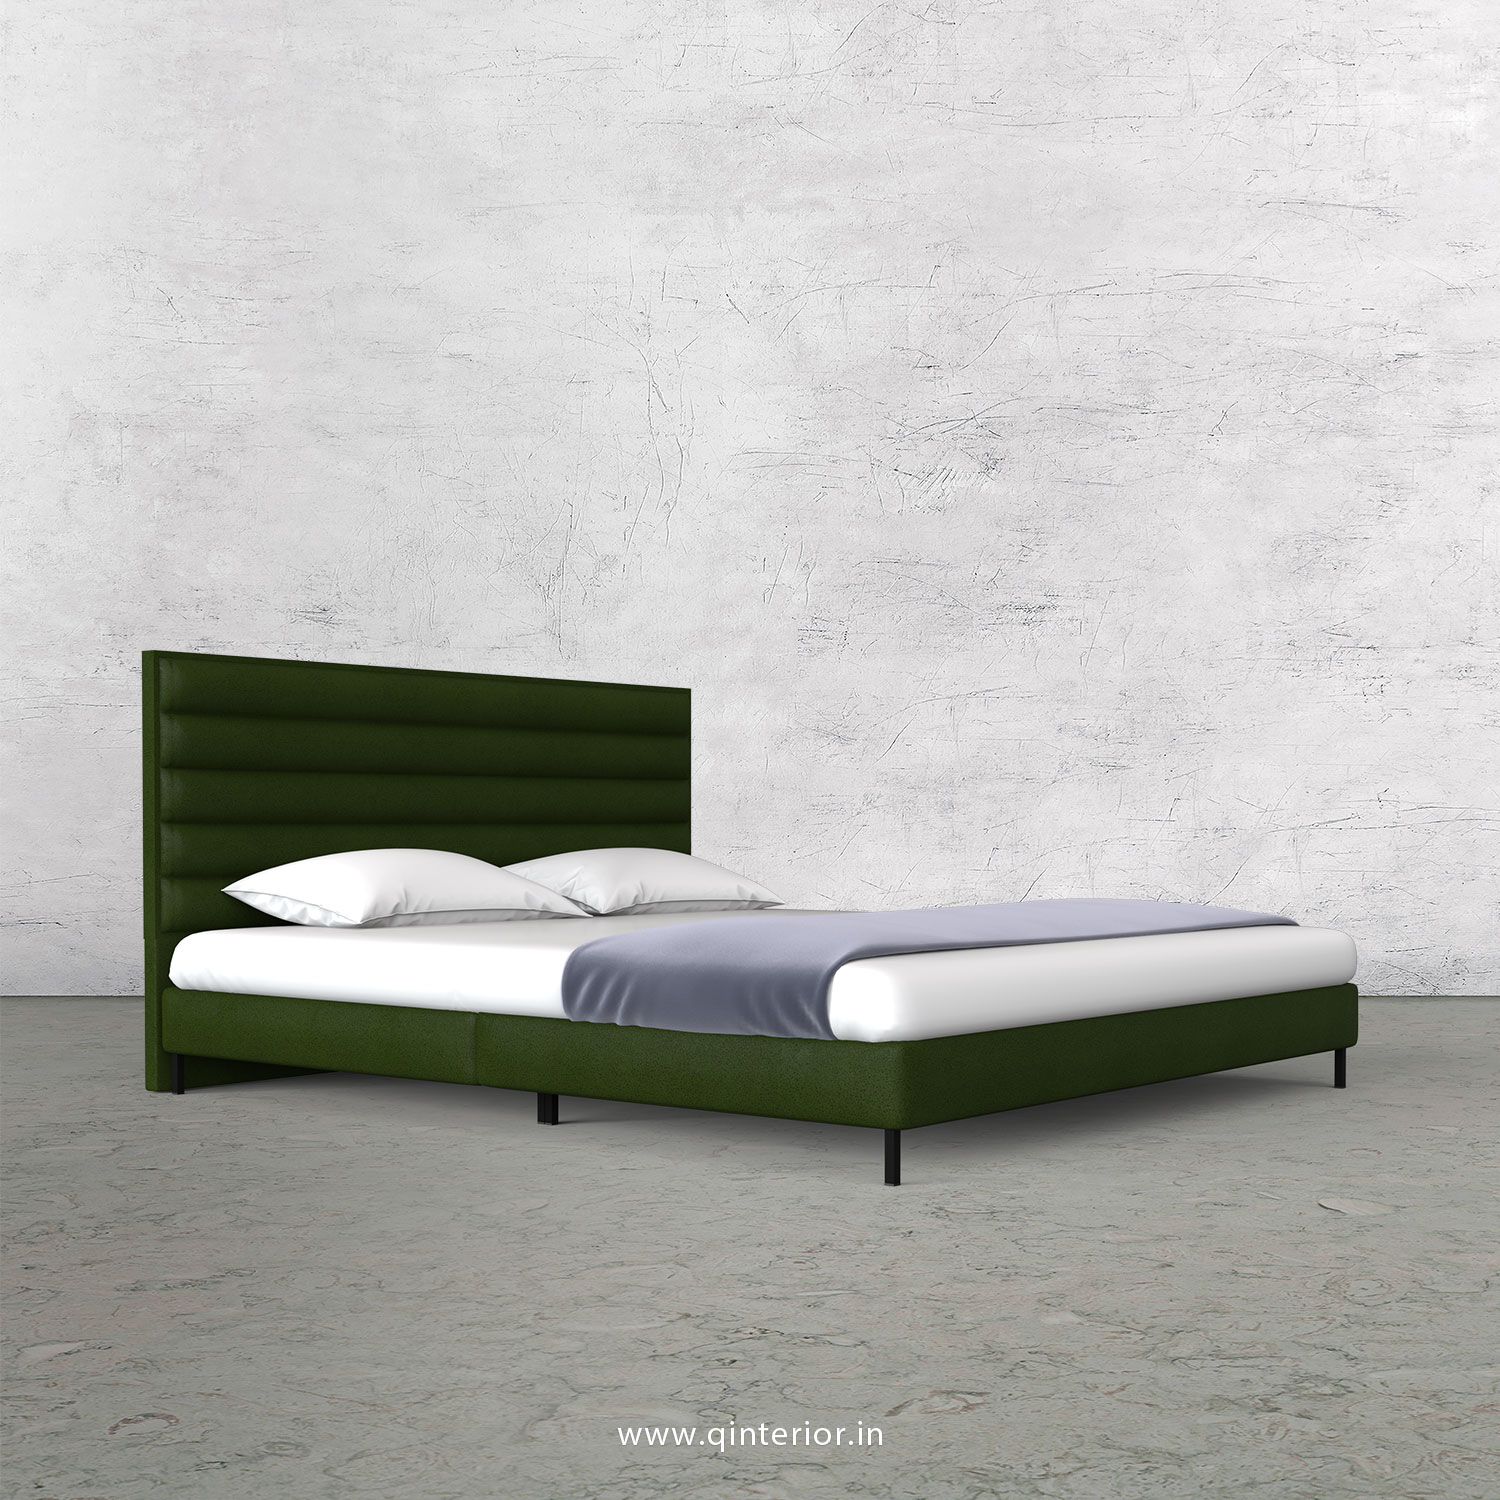 Crux King Size Bed in Fab Leather Fabric - KBD003 FL04